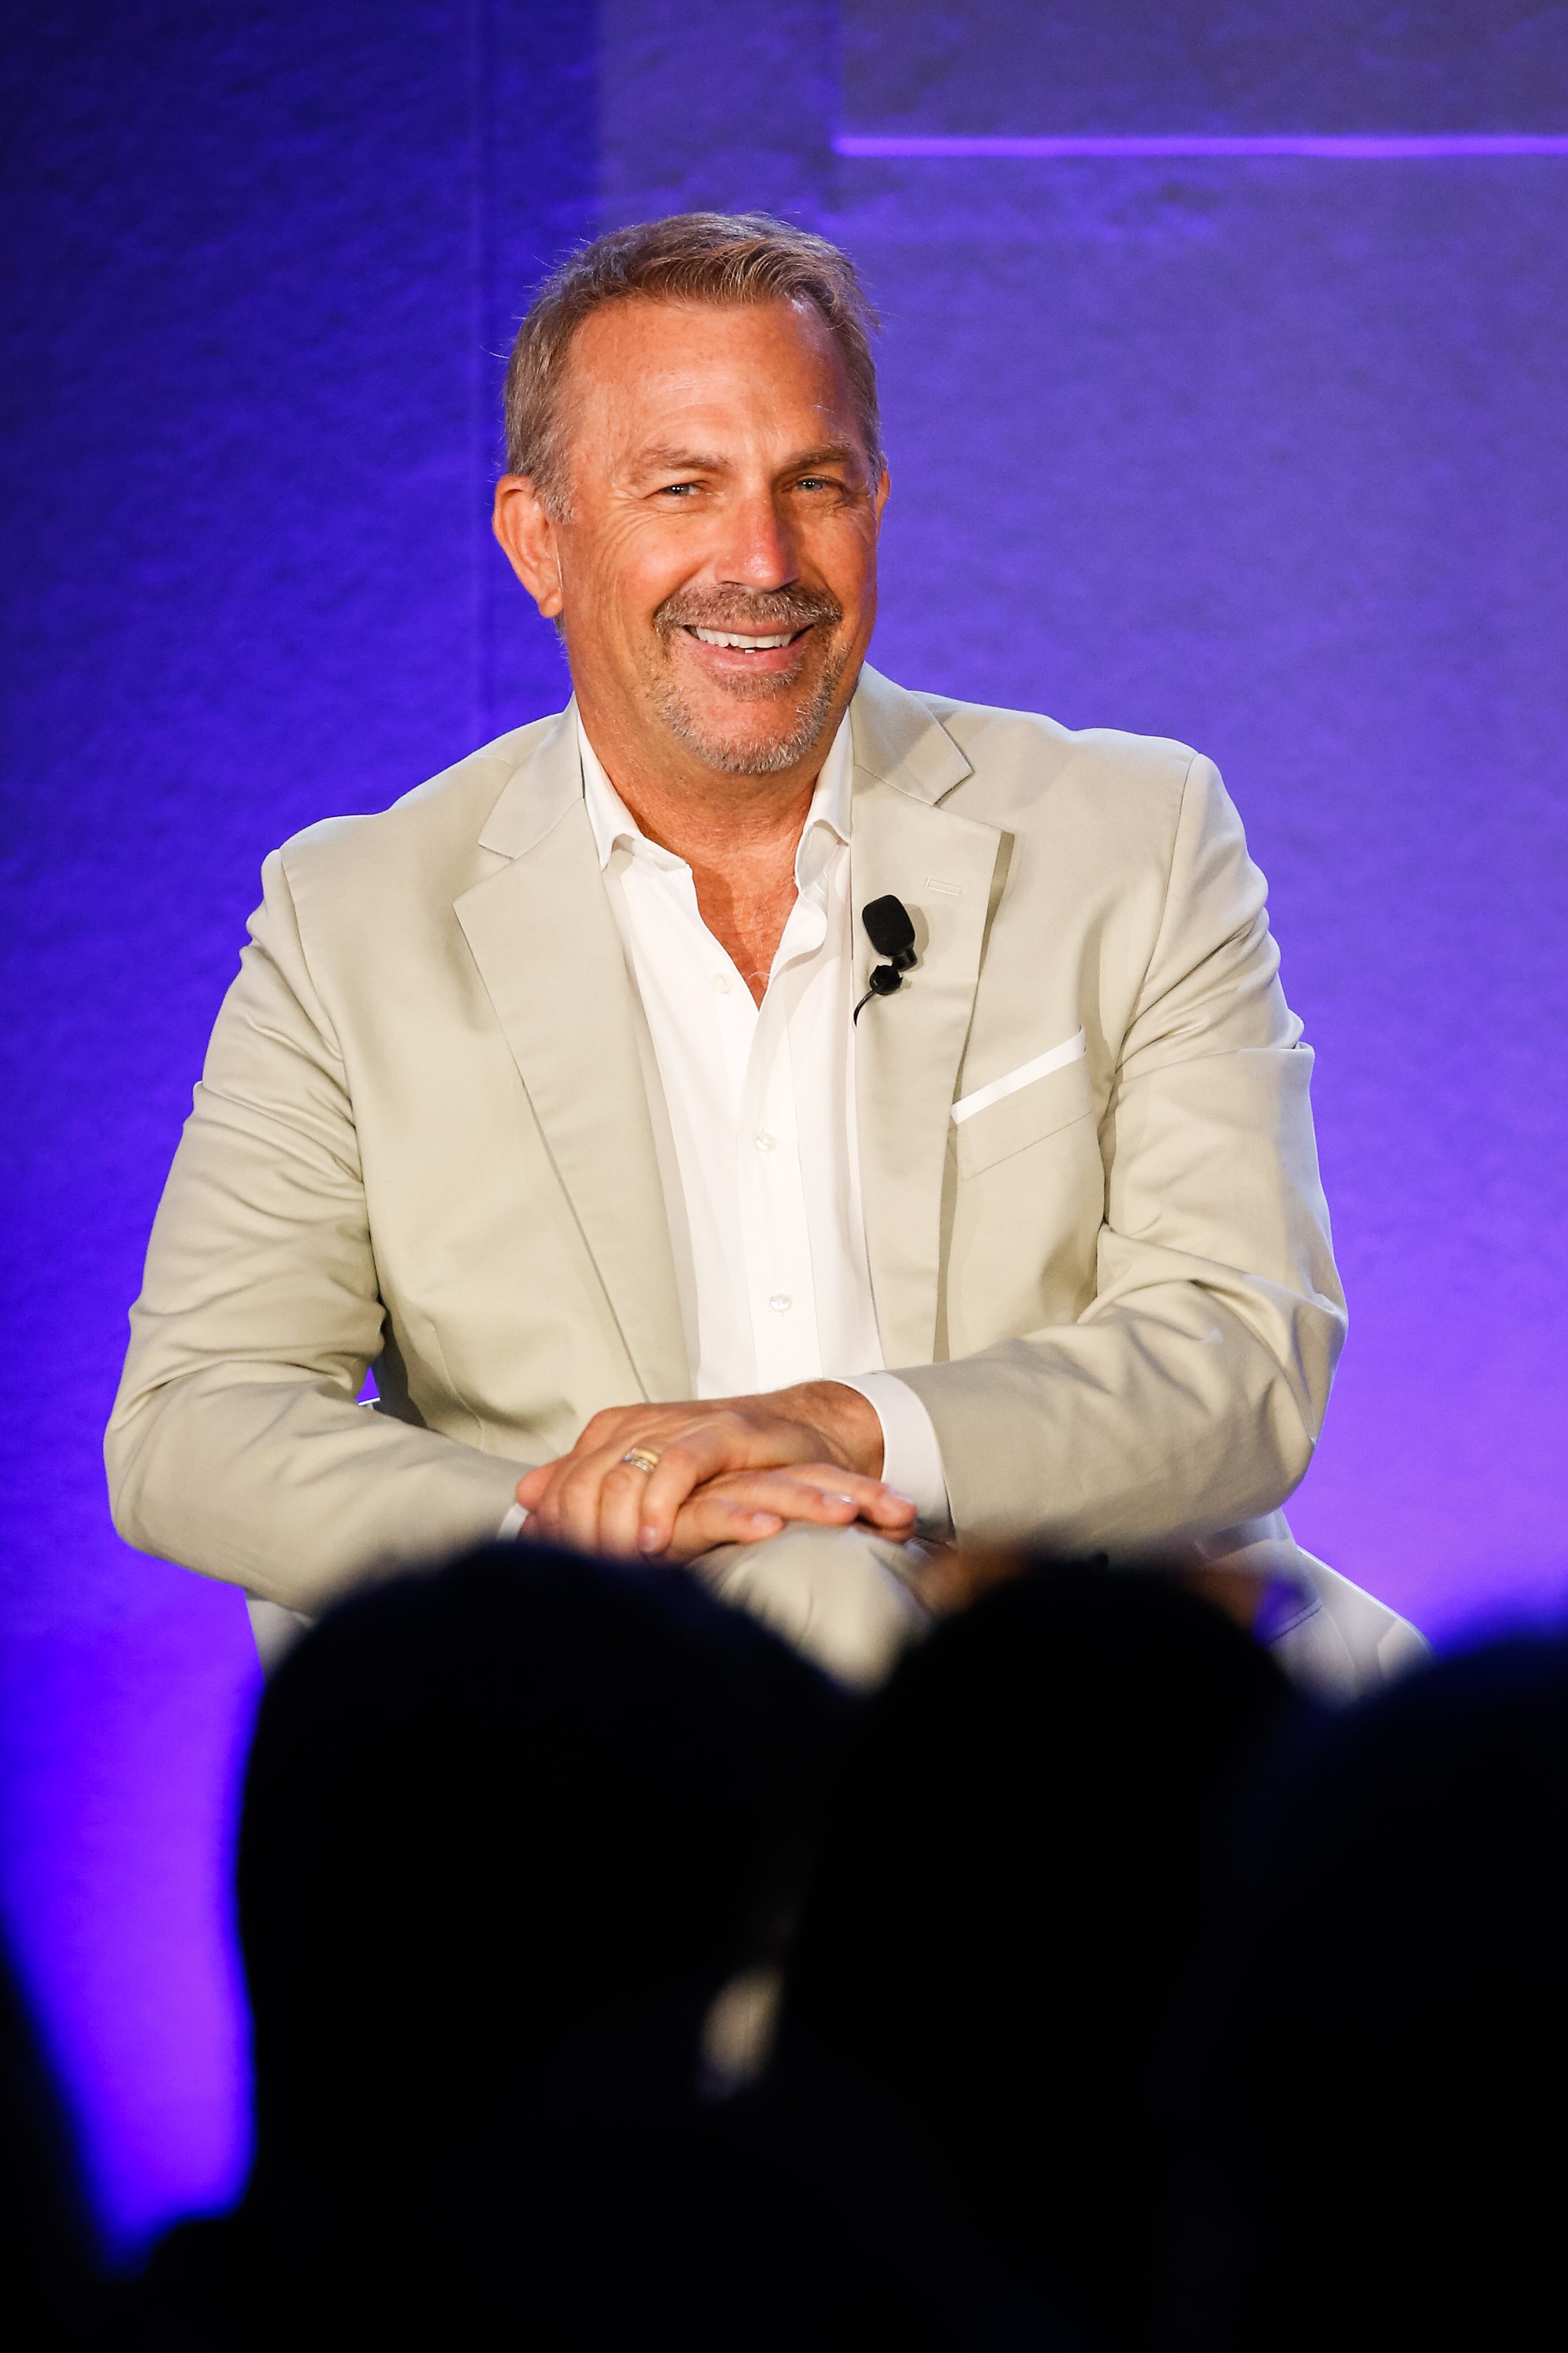 Kevin Costner speaks at the Cannes Lions Festival in France on June 21, 2018 | Photo: Getty Images